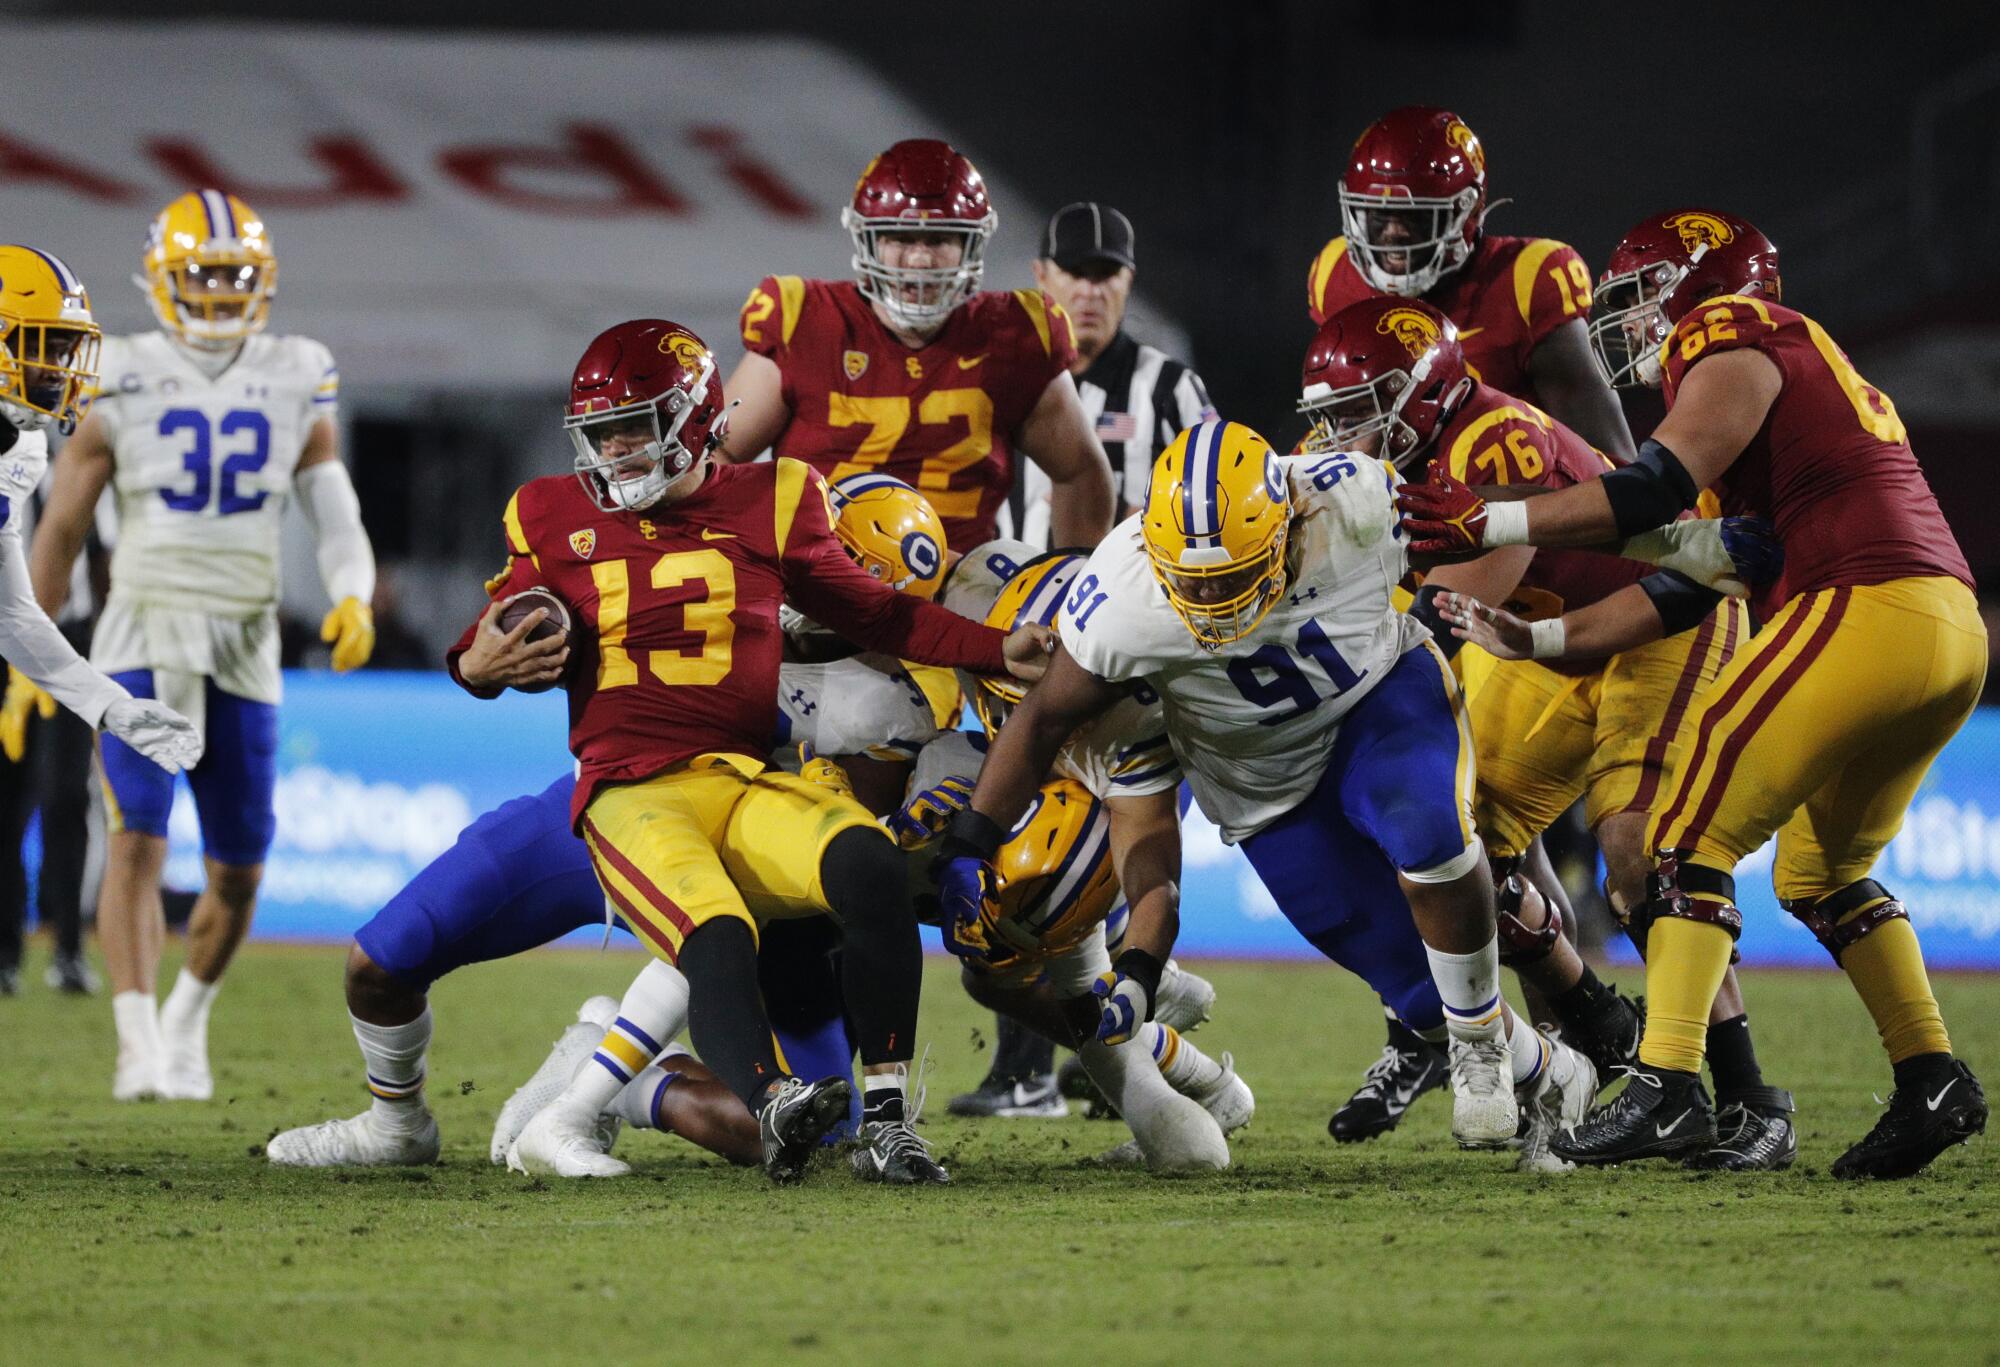 USC quarterback Caleb Williams carries the ball in the final moments of the game to secure a victory for the Trojans.